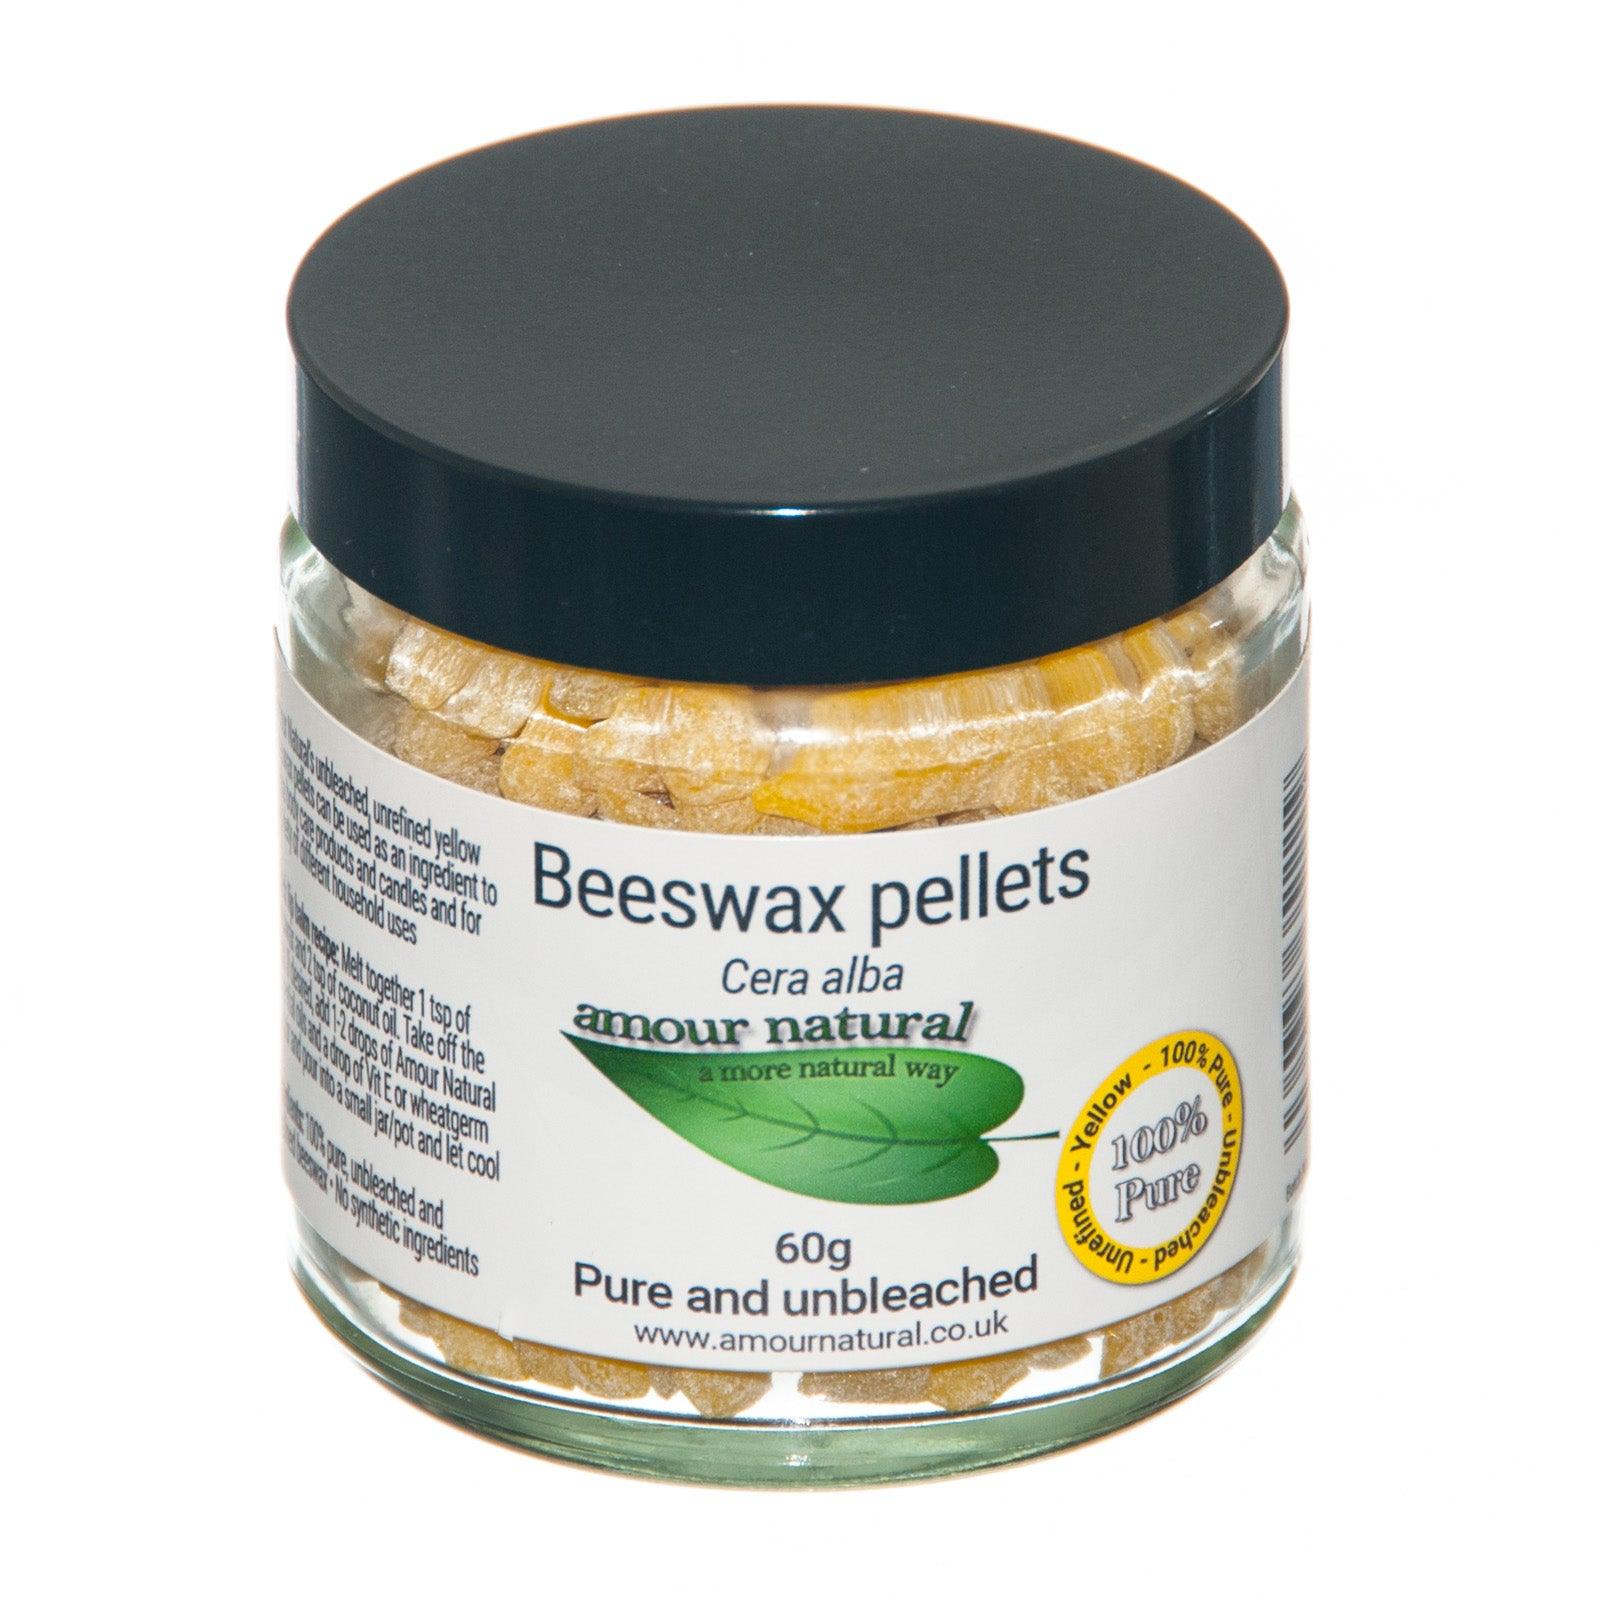 Amour Natural Beeswax Pellets 60g - Approved Vitamins